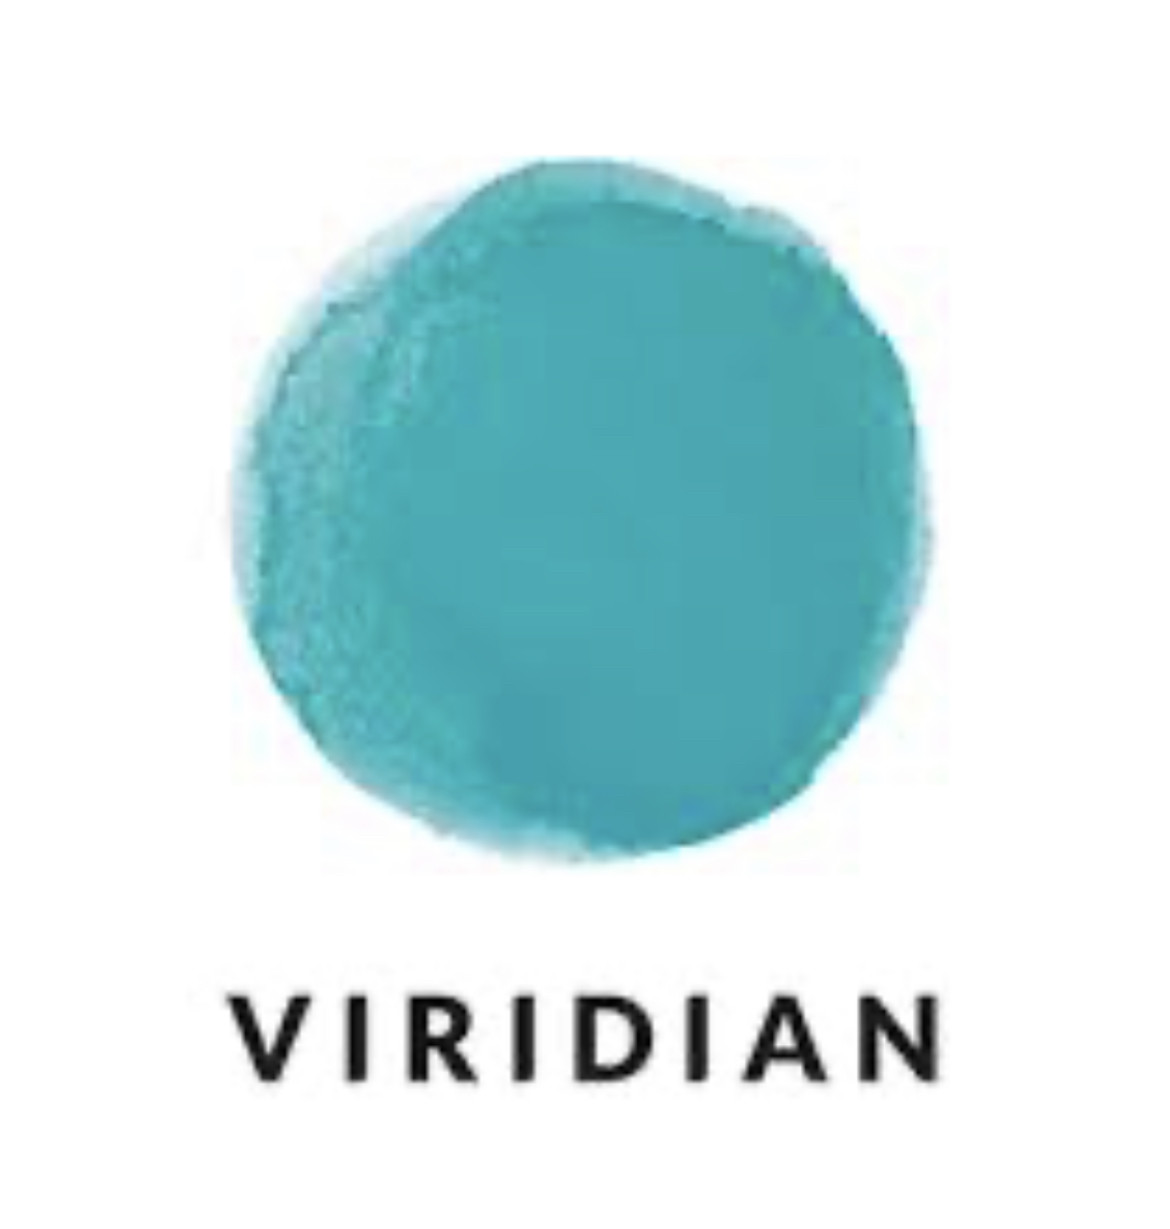 Millwall Community Trust delighted to announce it has received a small donation from The Viridian Nutrition Charity